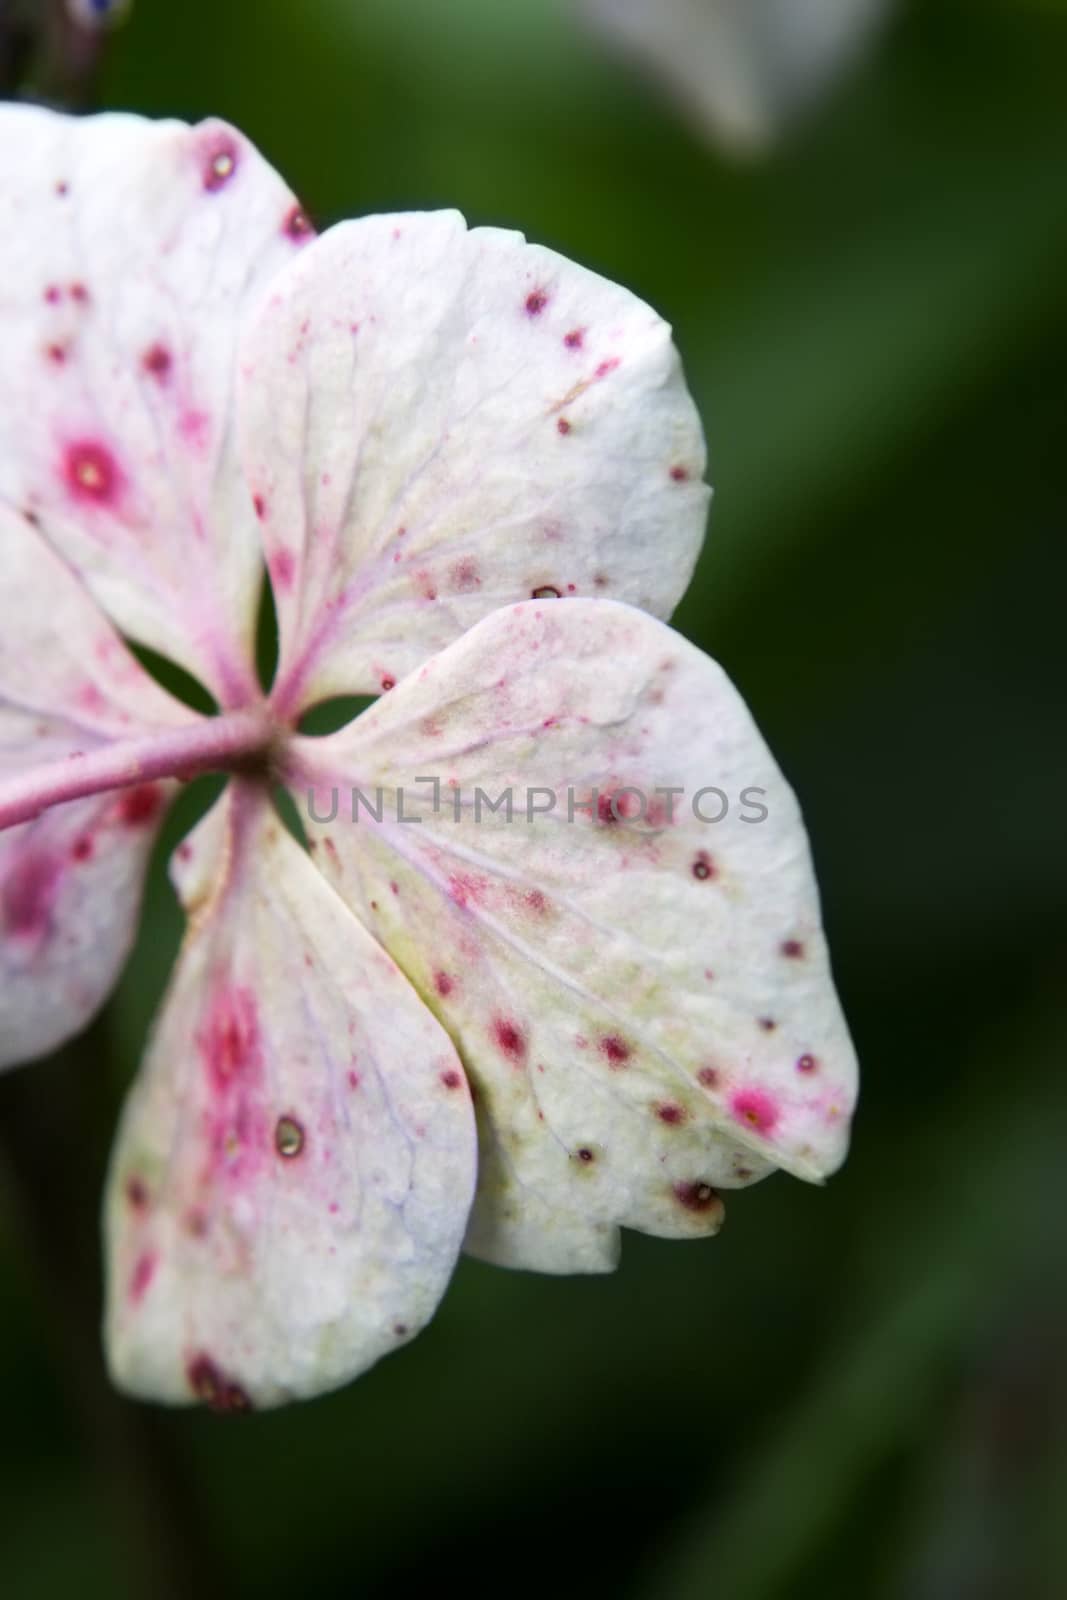 An image of a hydrangea detail blossom